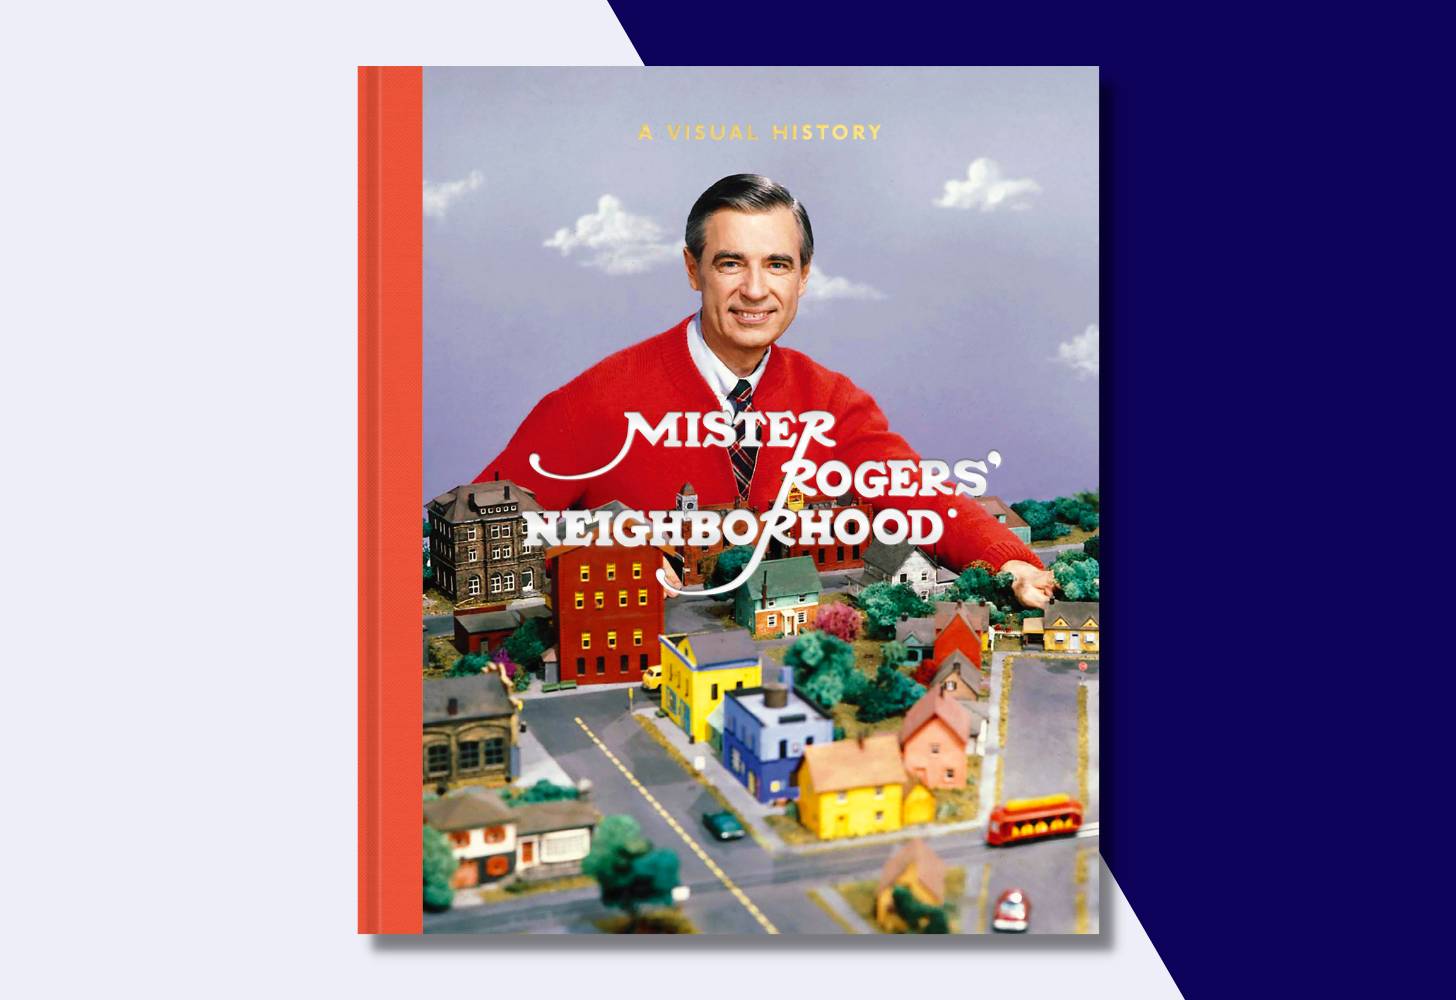 “Mister Rogers’ Neighborhood: A Visual History” by Fred Rogers Productions, Tim Lybarger, Melissa Wagner, foreword by Tom Hanks